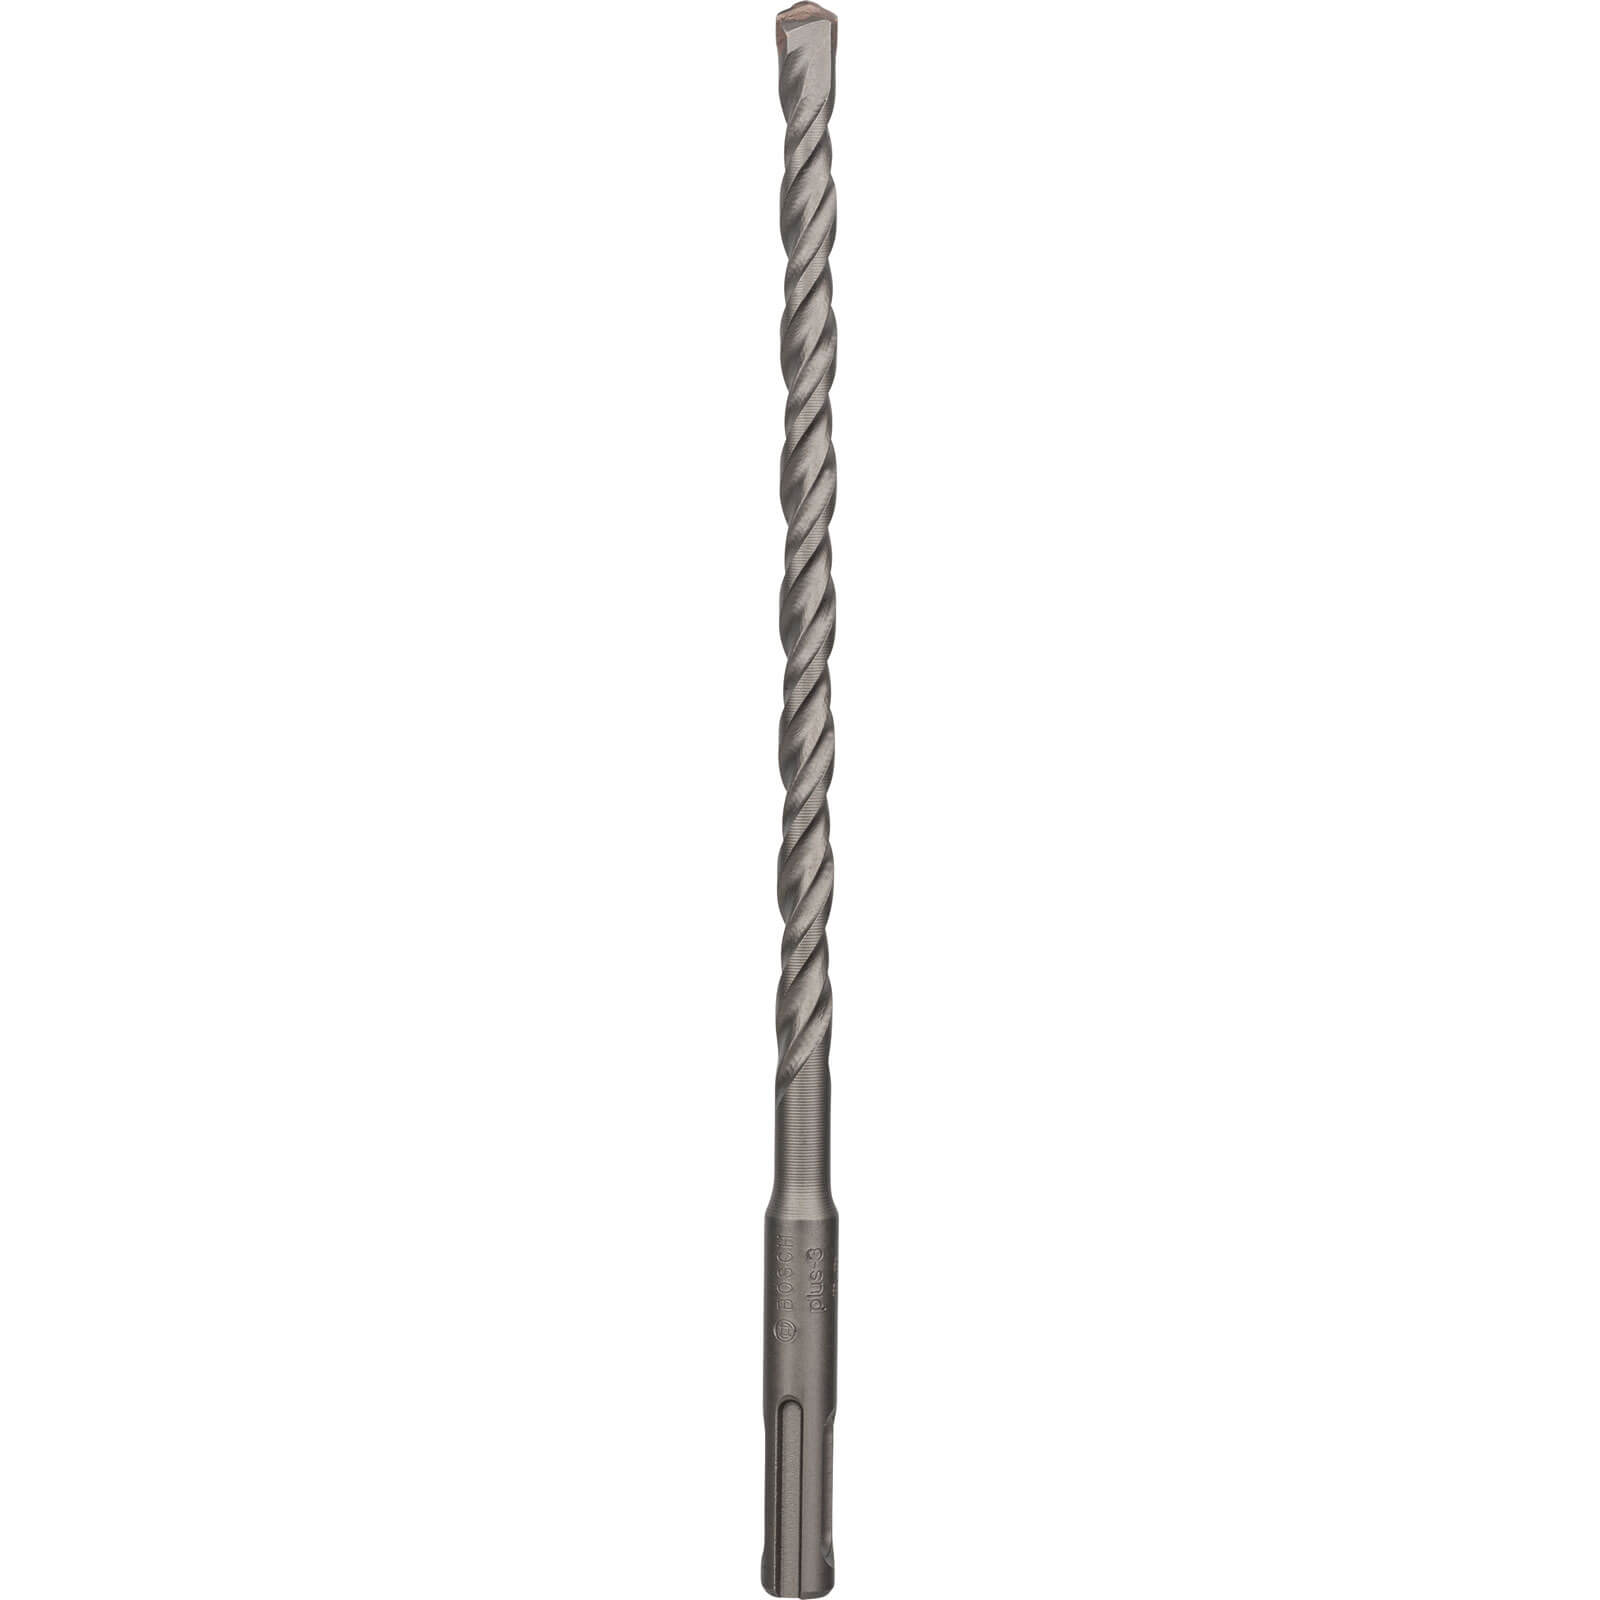 Image of Bosch Series 3 SDS Plus Masonry Drill Bit 8mm 210mm Pack of 10